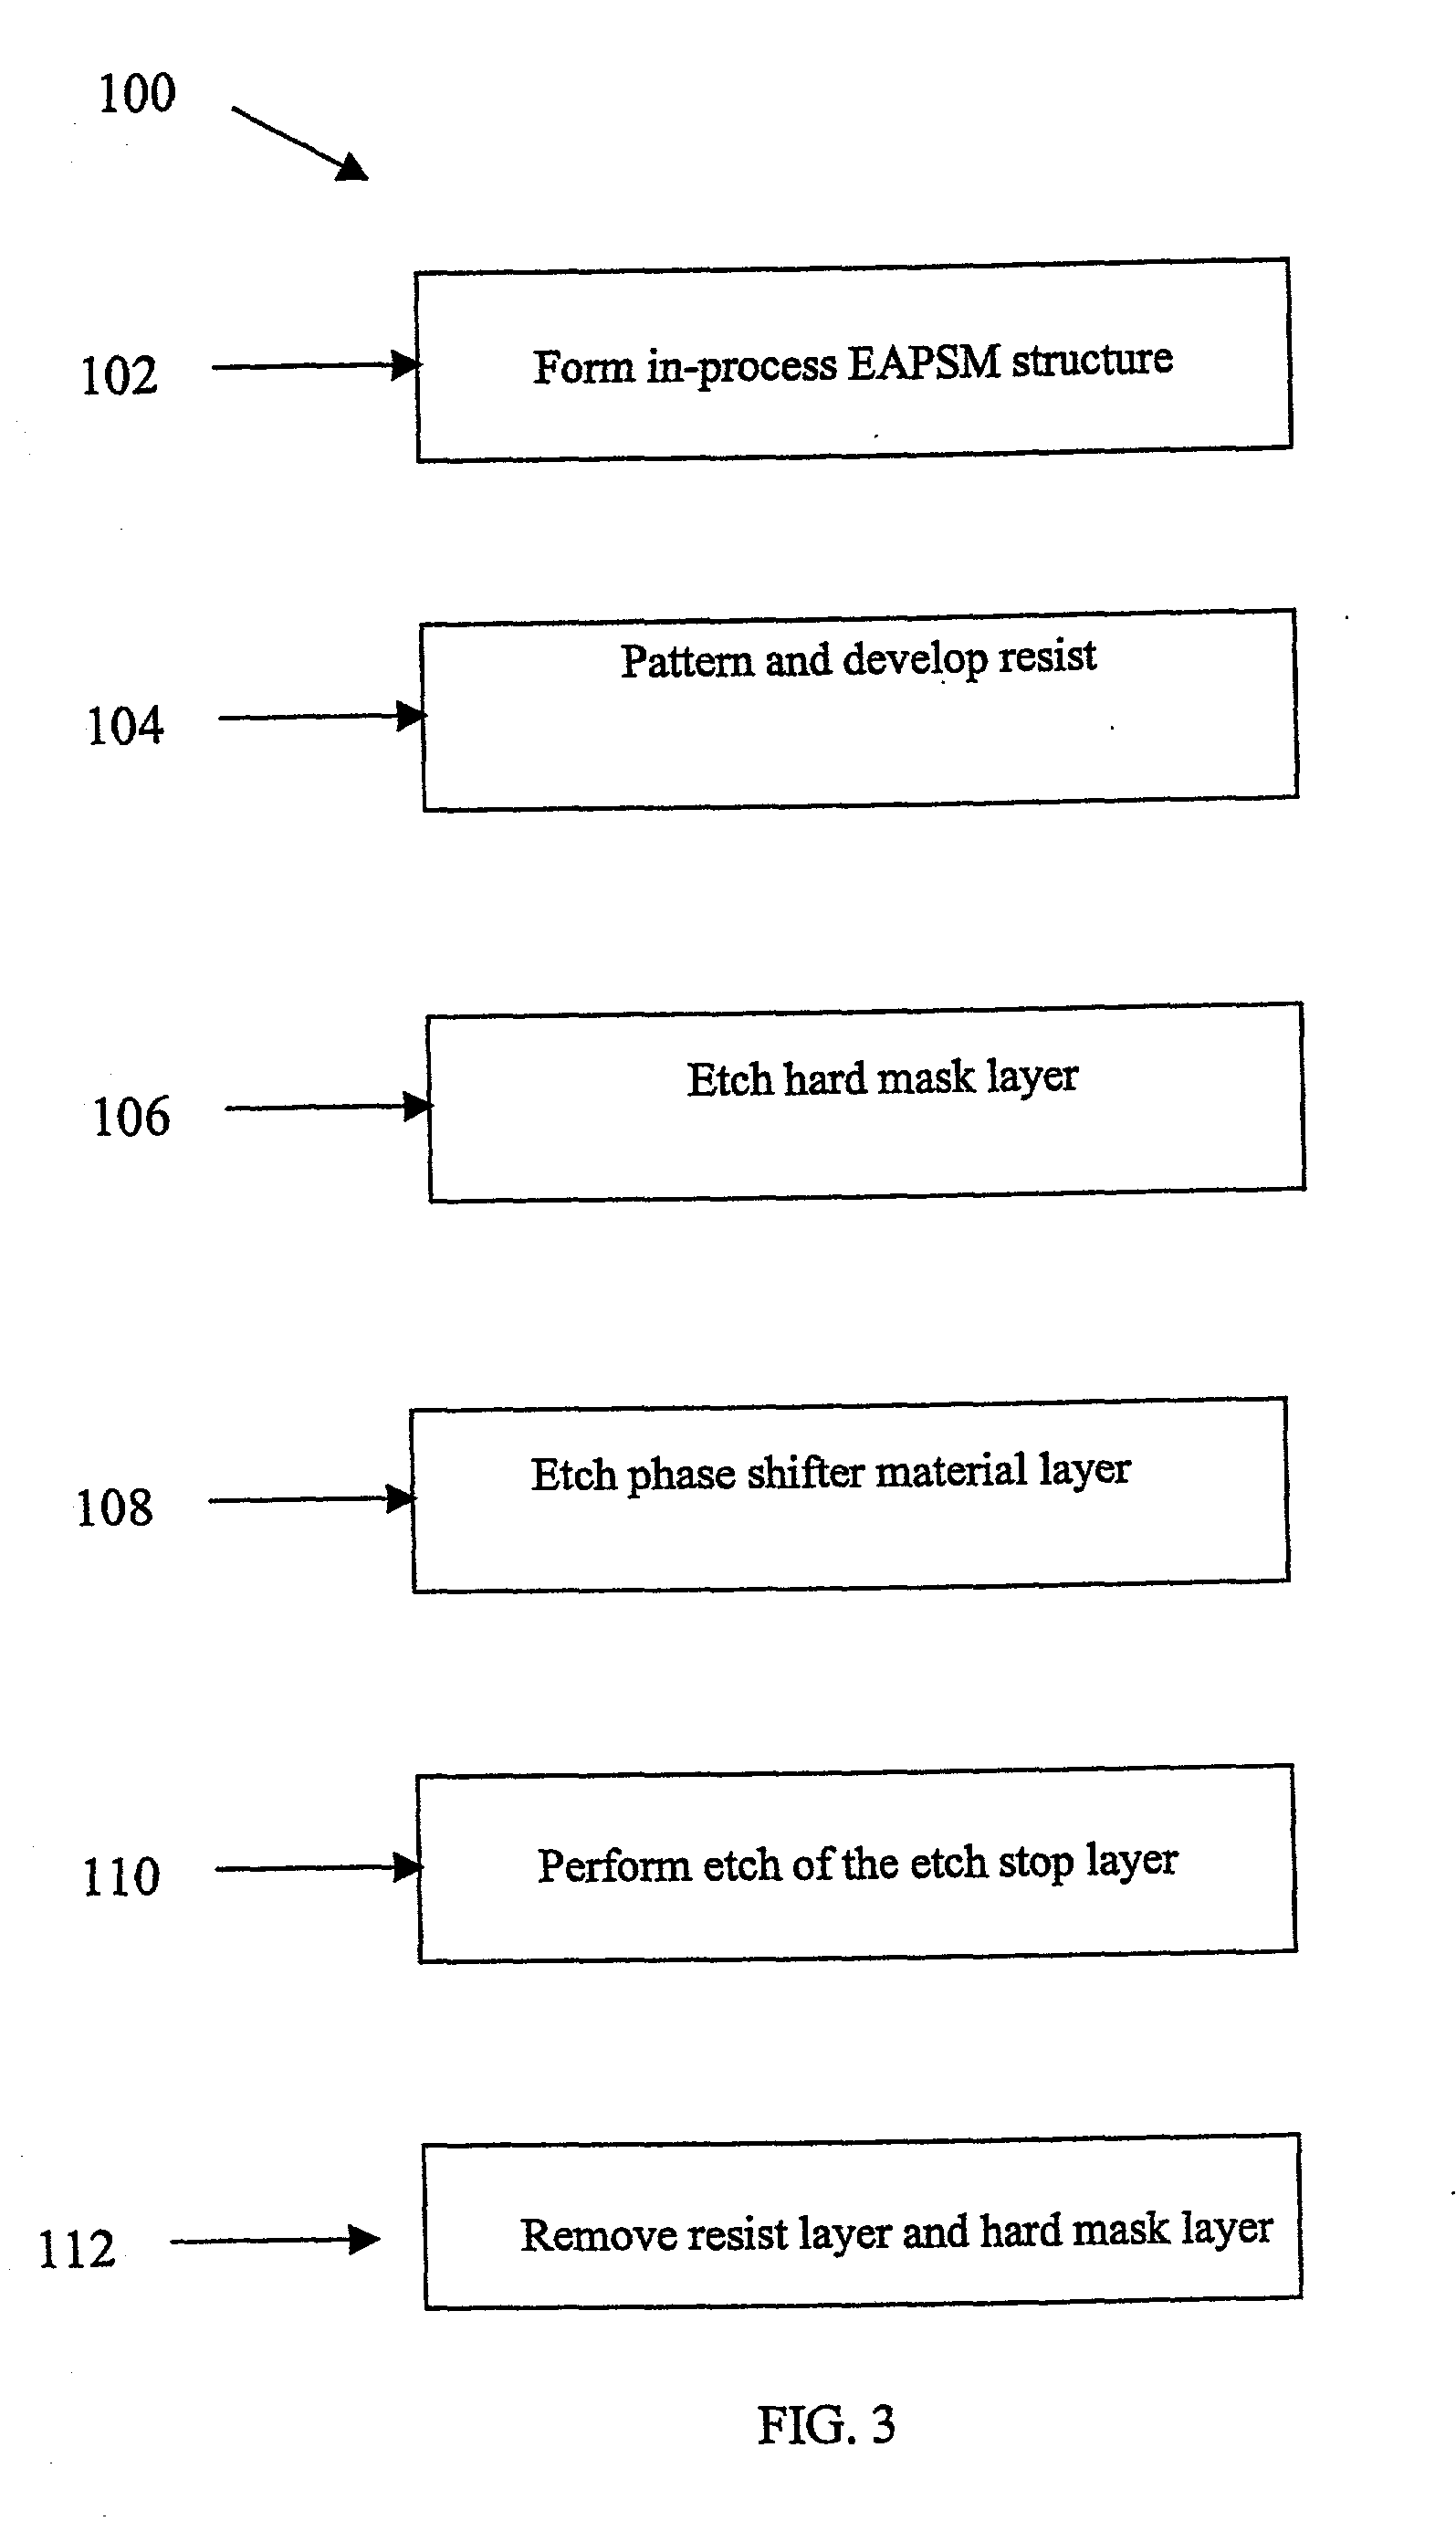 Embedded attenuated phase shift mask and method of making embedded attenuated phase shift mask